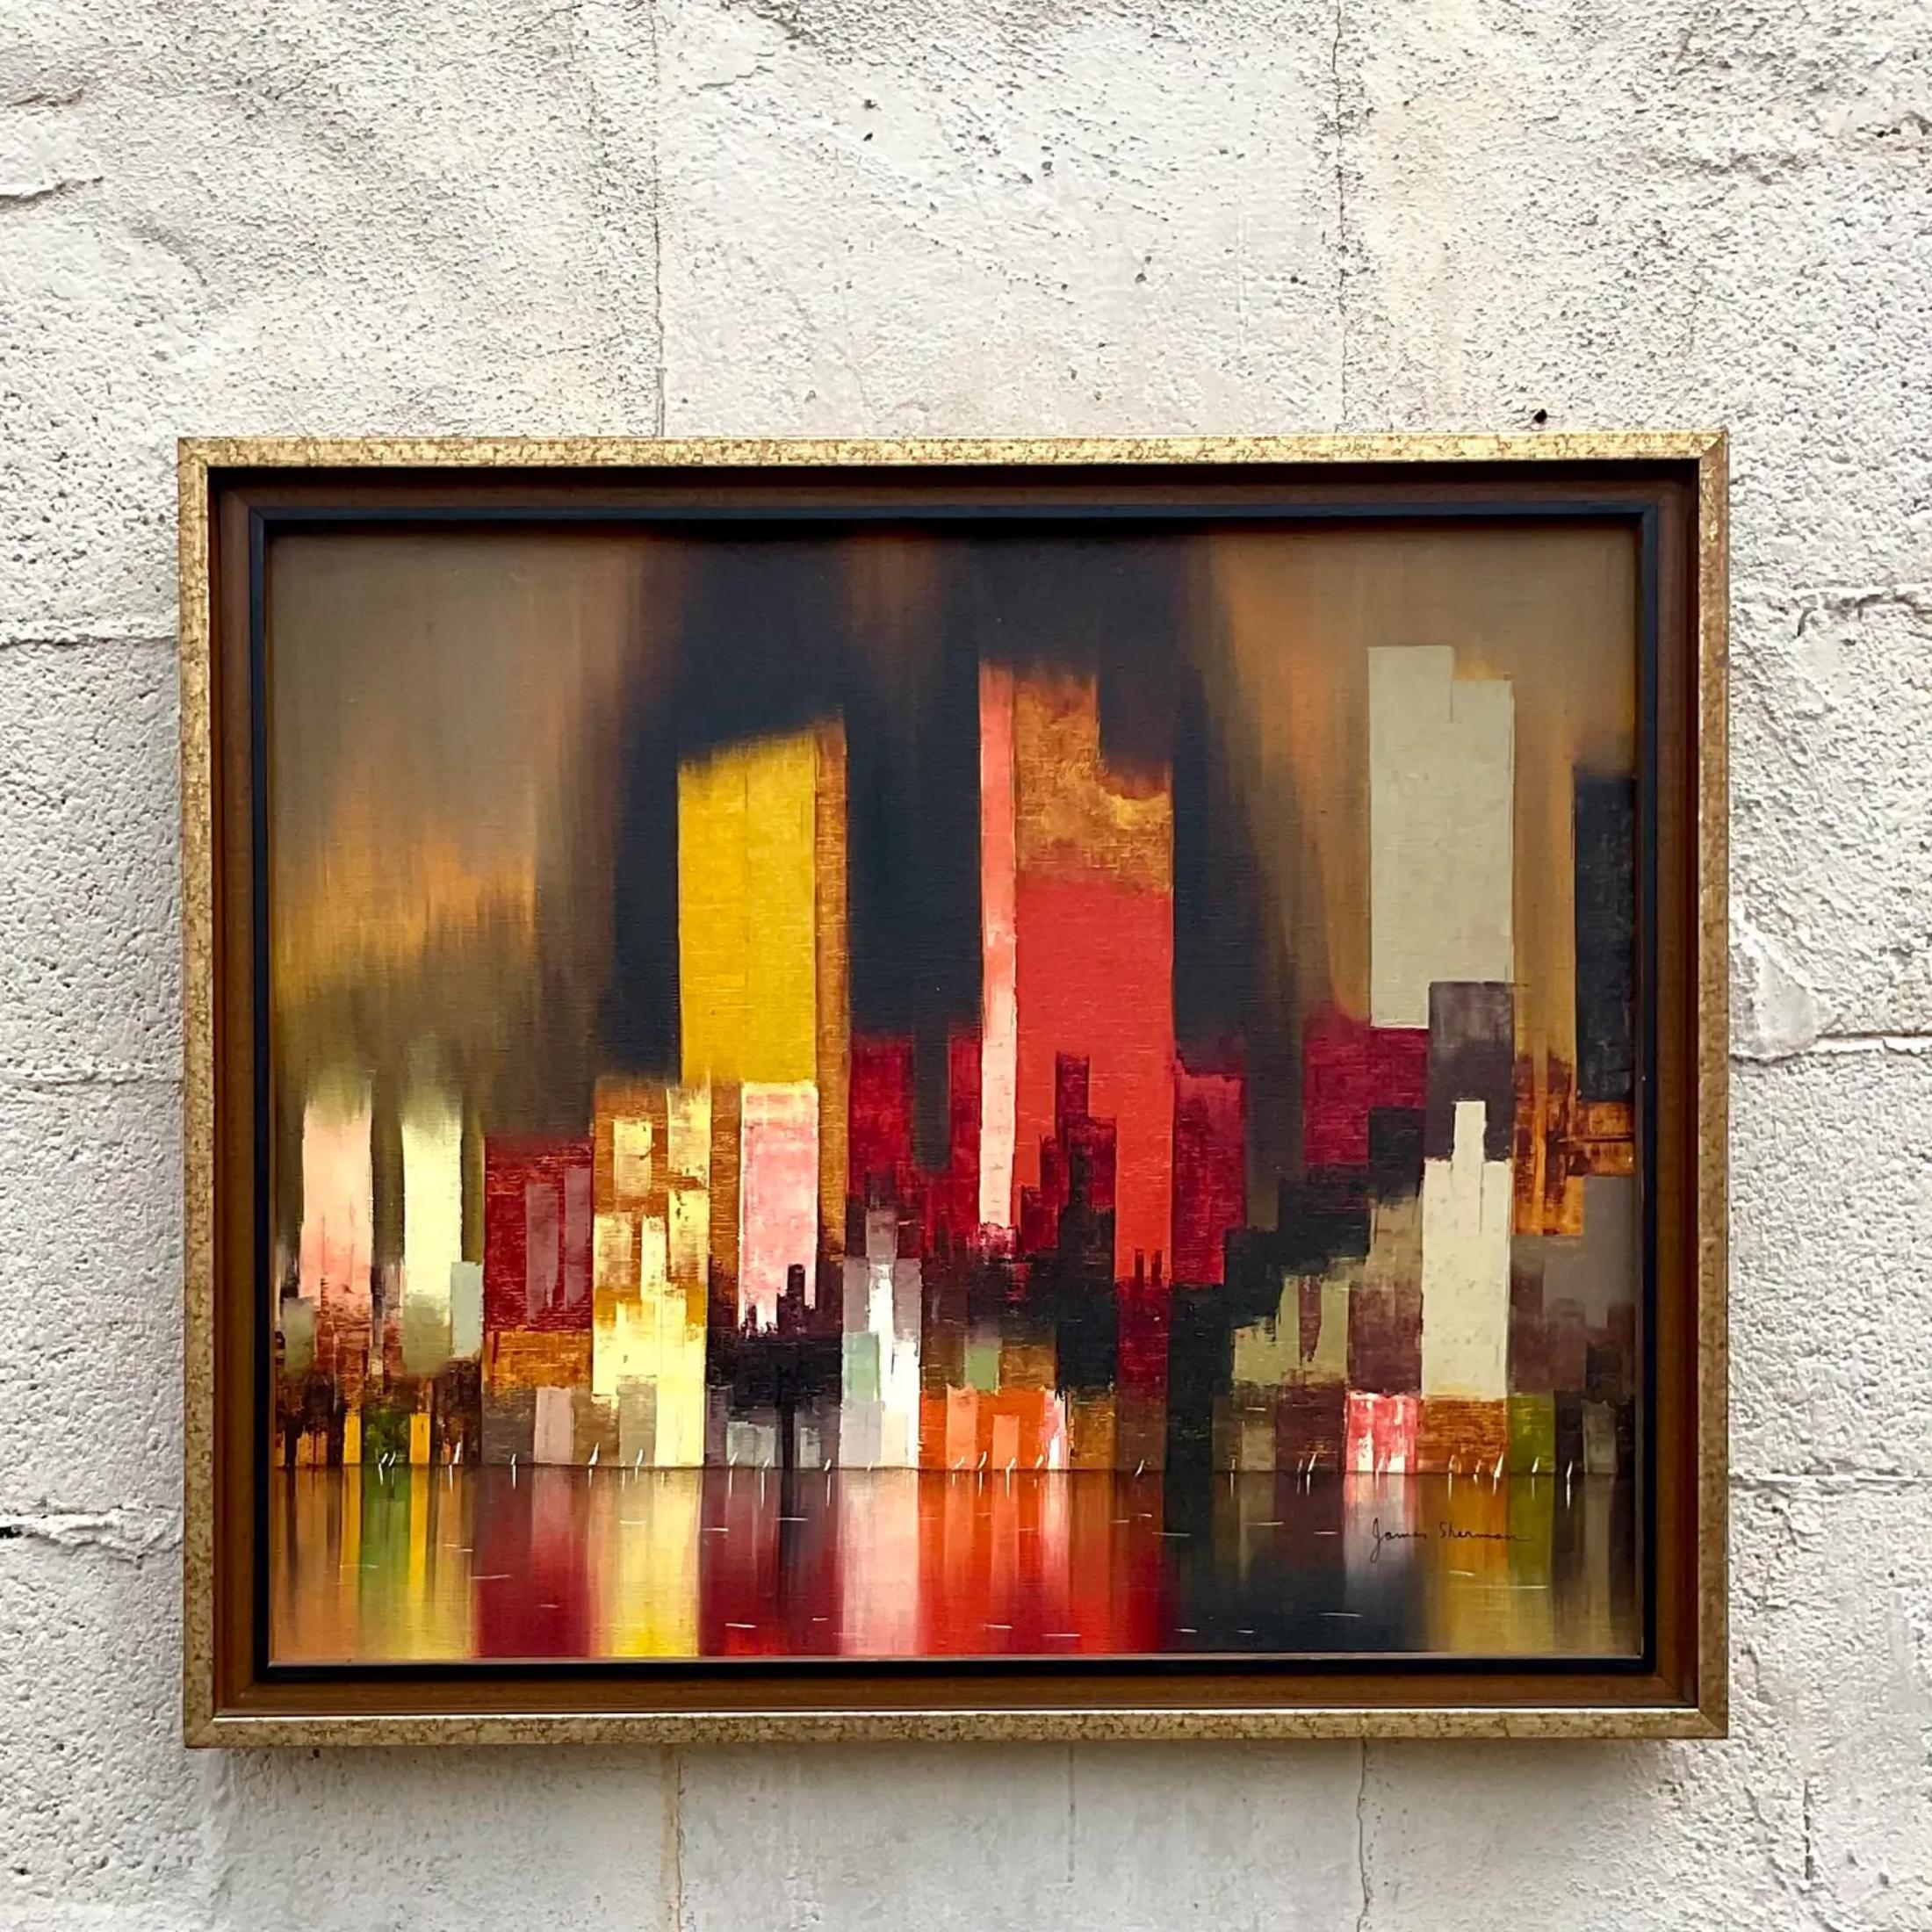 A fabulous vintage Boho original oil painting on canvas. A chic Abstract composition in rich warm colors. Signed by the artist. Acquired from a palm Beach estate